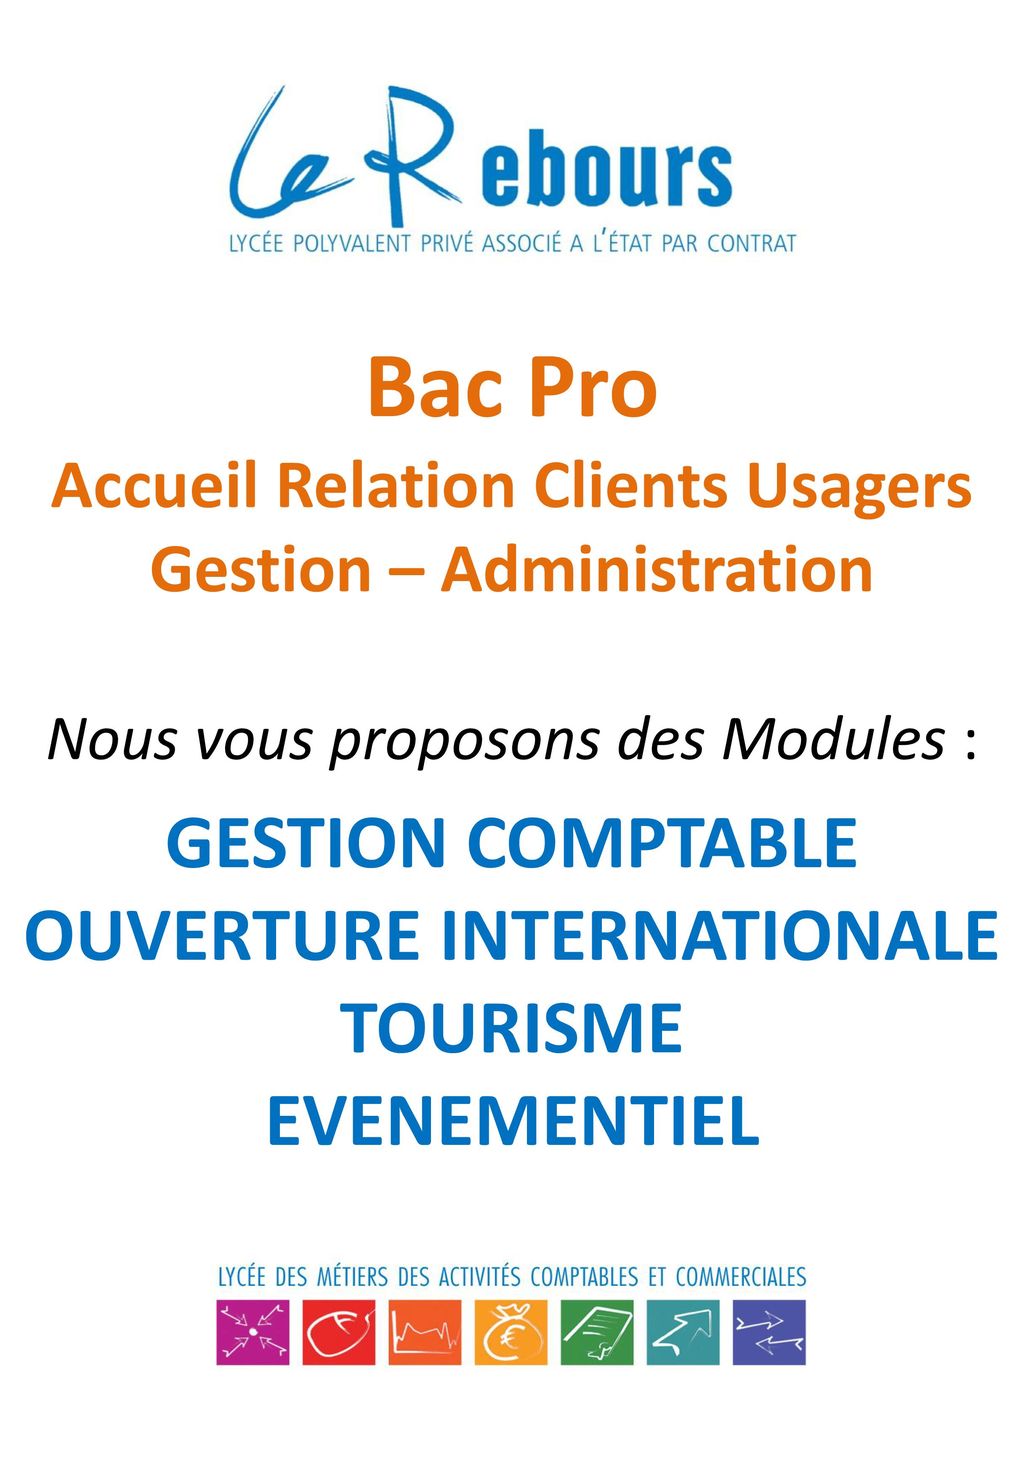 Accueil Relation Clients Usagers Gestion – Administration